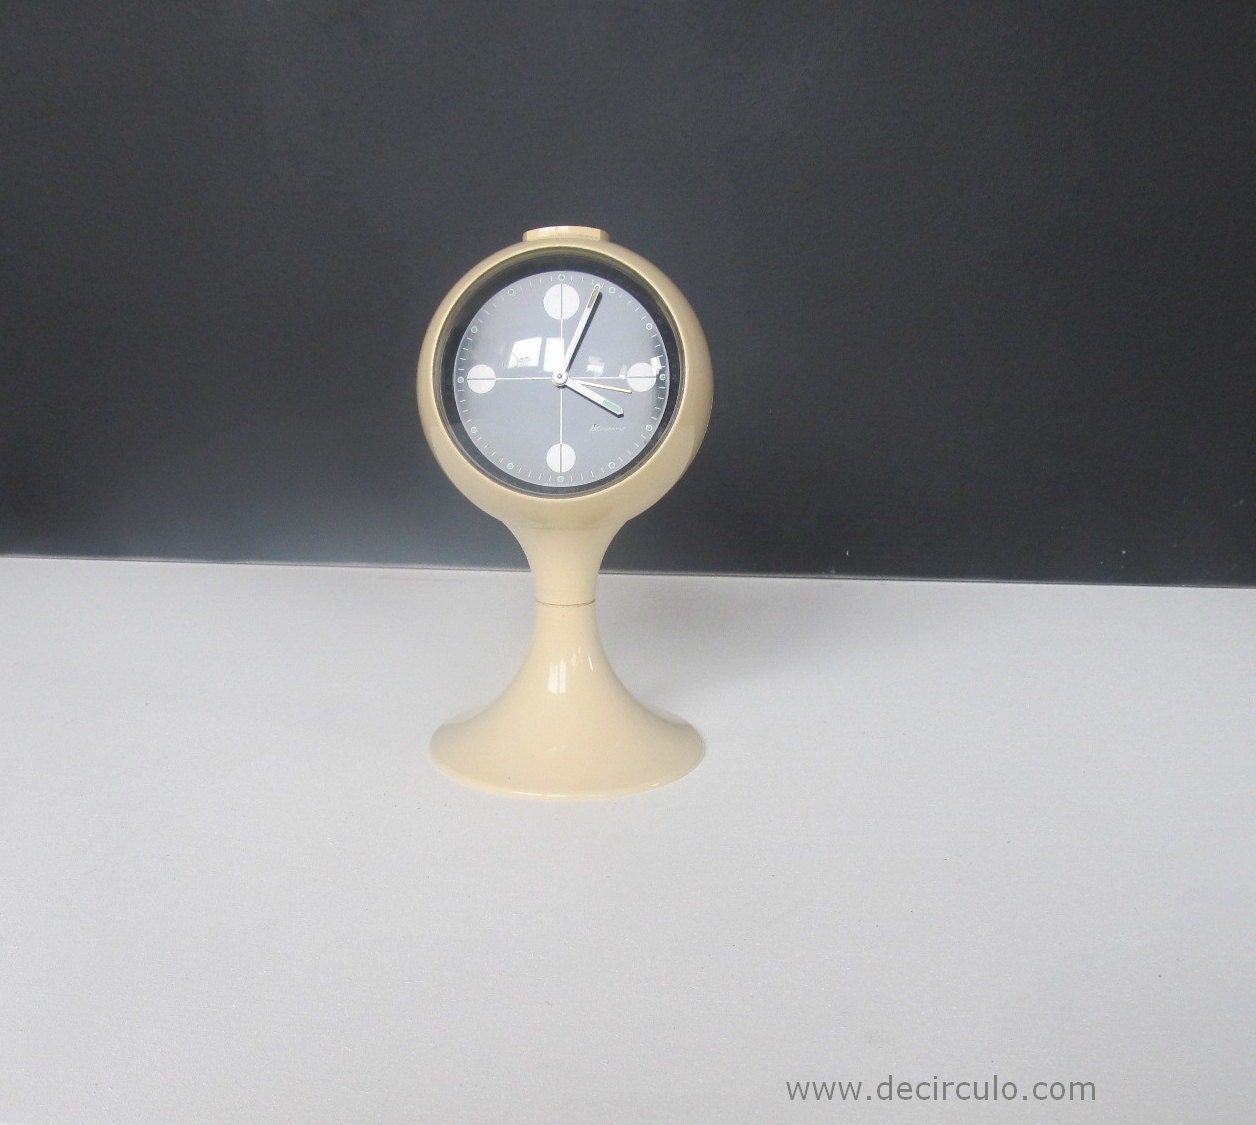 Blessing alarm clock, white pedestal tulip shape, made in Germany. Space age era, made of plastic from the early 1970s